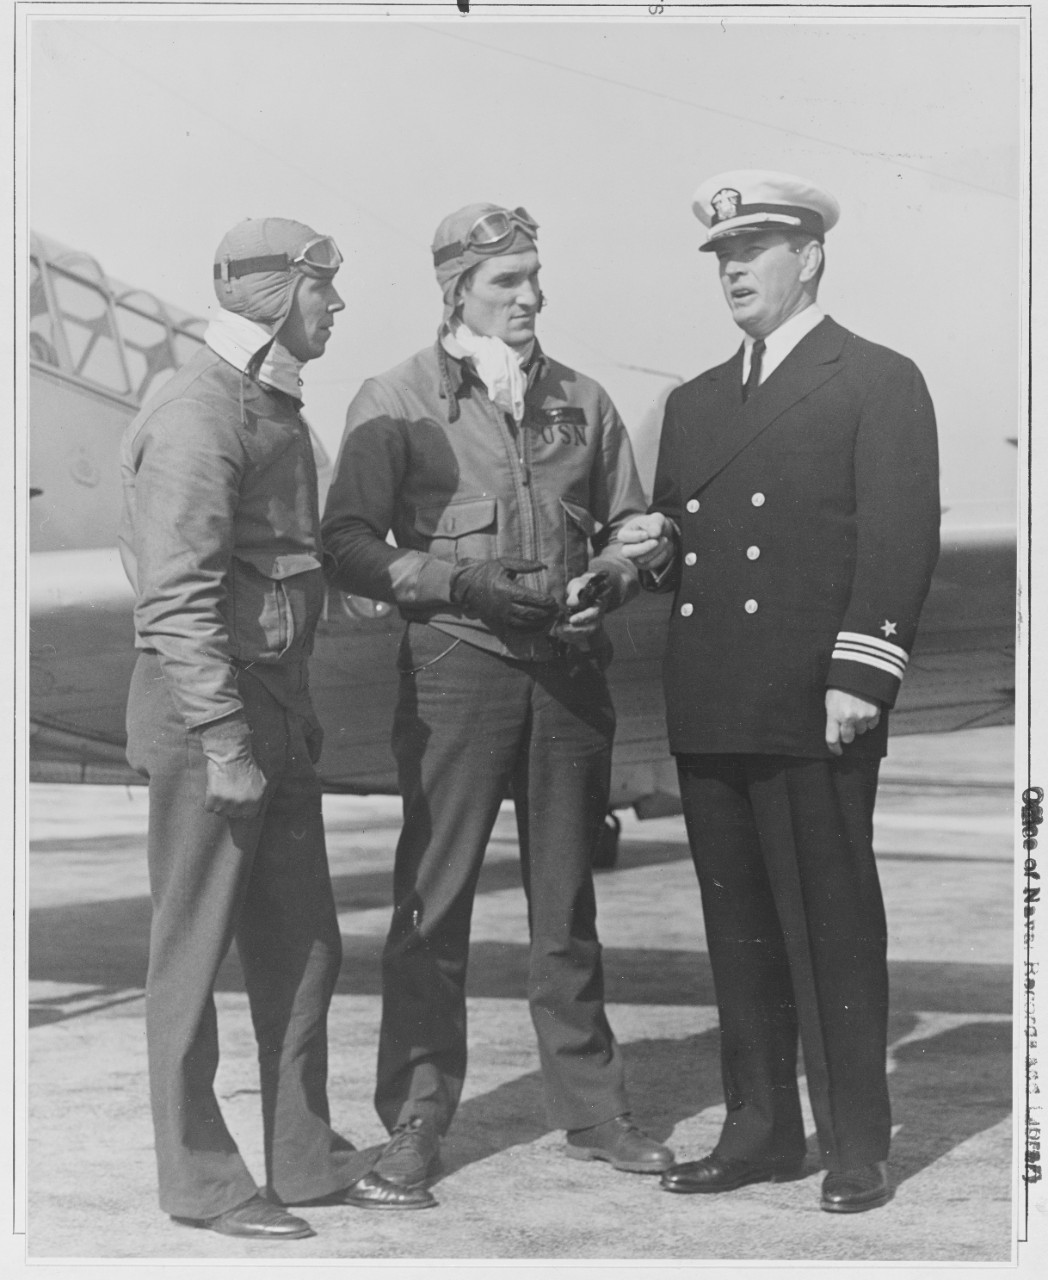 Lt. Comdr. J. J. (Gene) Tunney the Navy new athletic director, talking to cadets B.T. rude and D.M. Harmon at the Naval Air Station, Pensacola Fla.